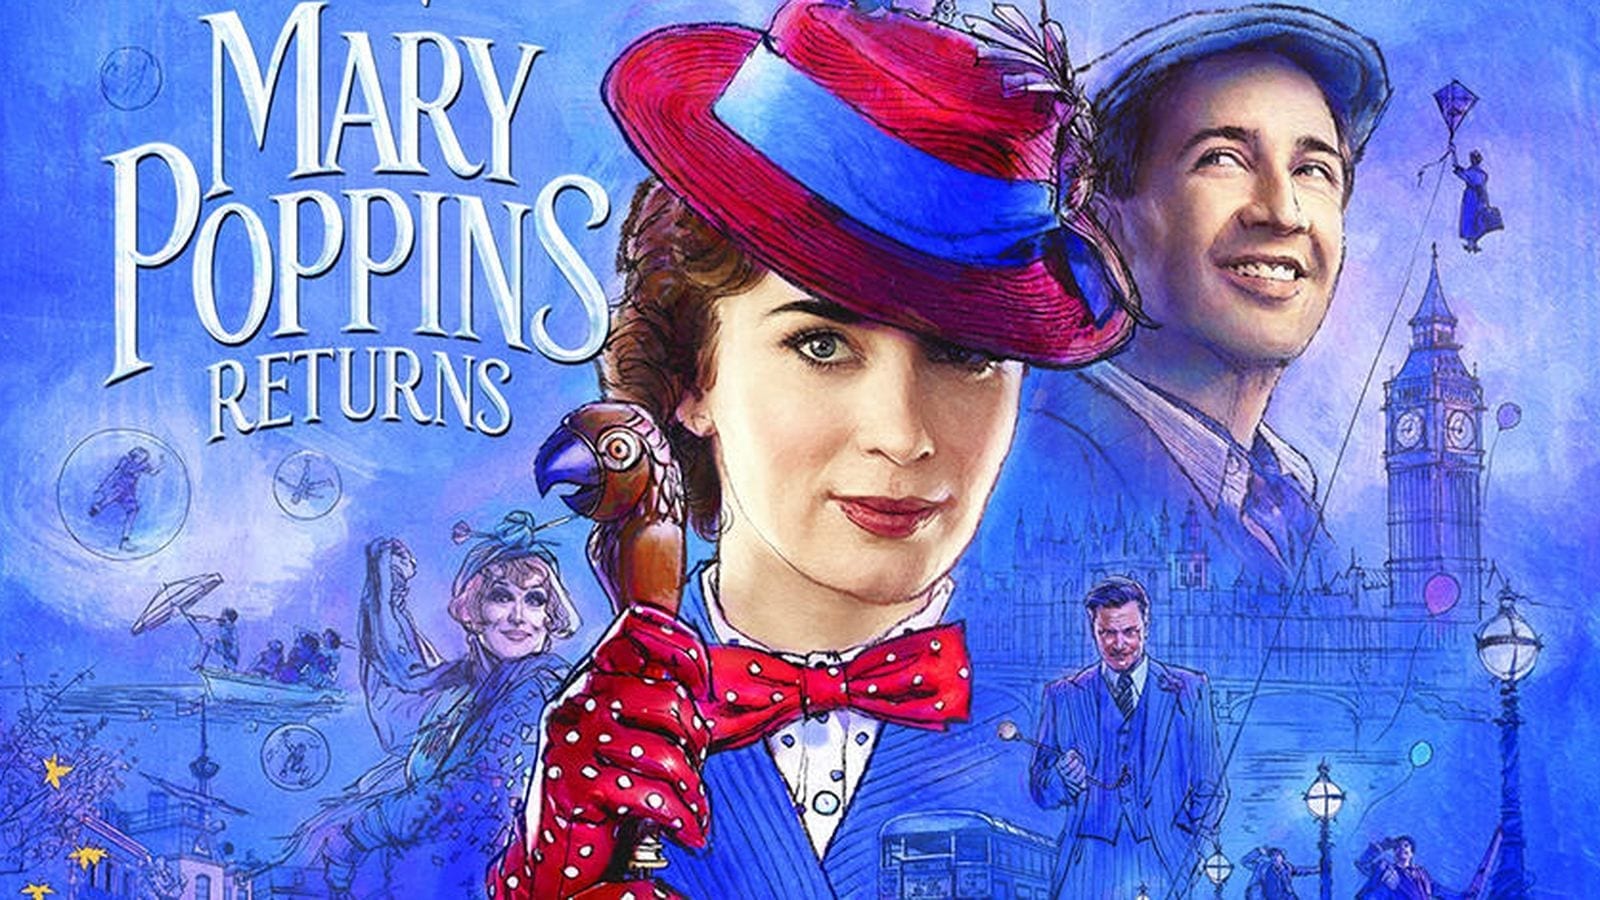 “Mary Poppins Returns,” Here’s Disney’s First Official Trailer! #MaryPoppinsReturns